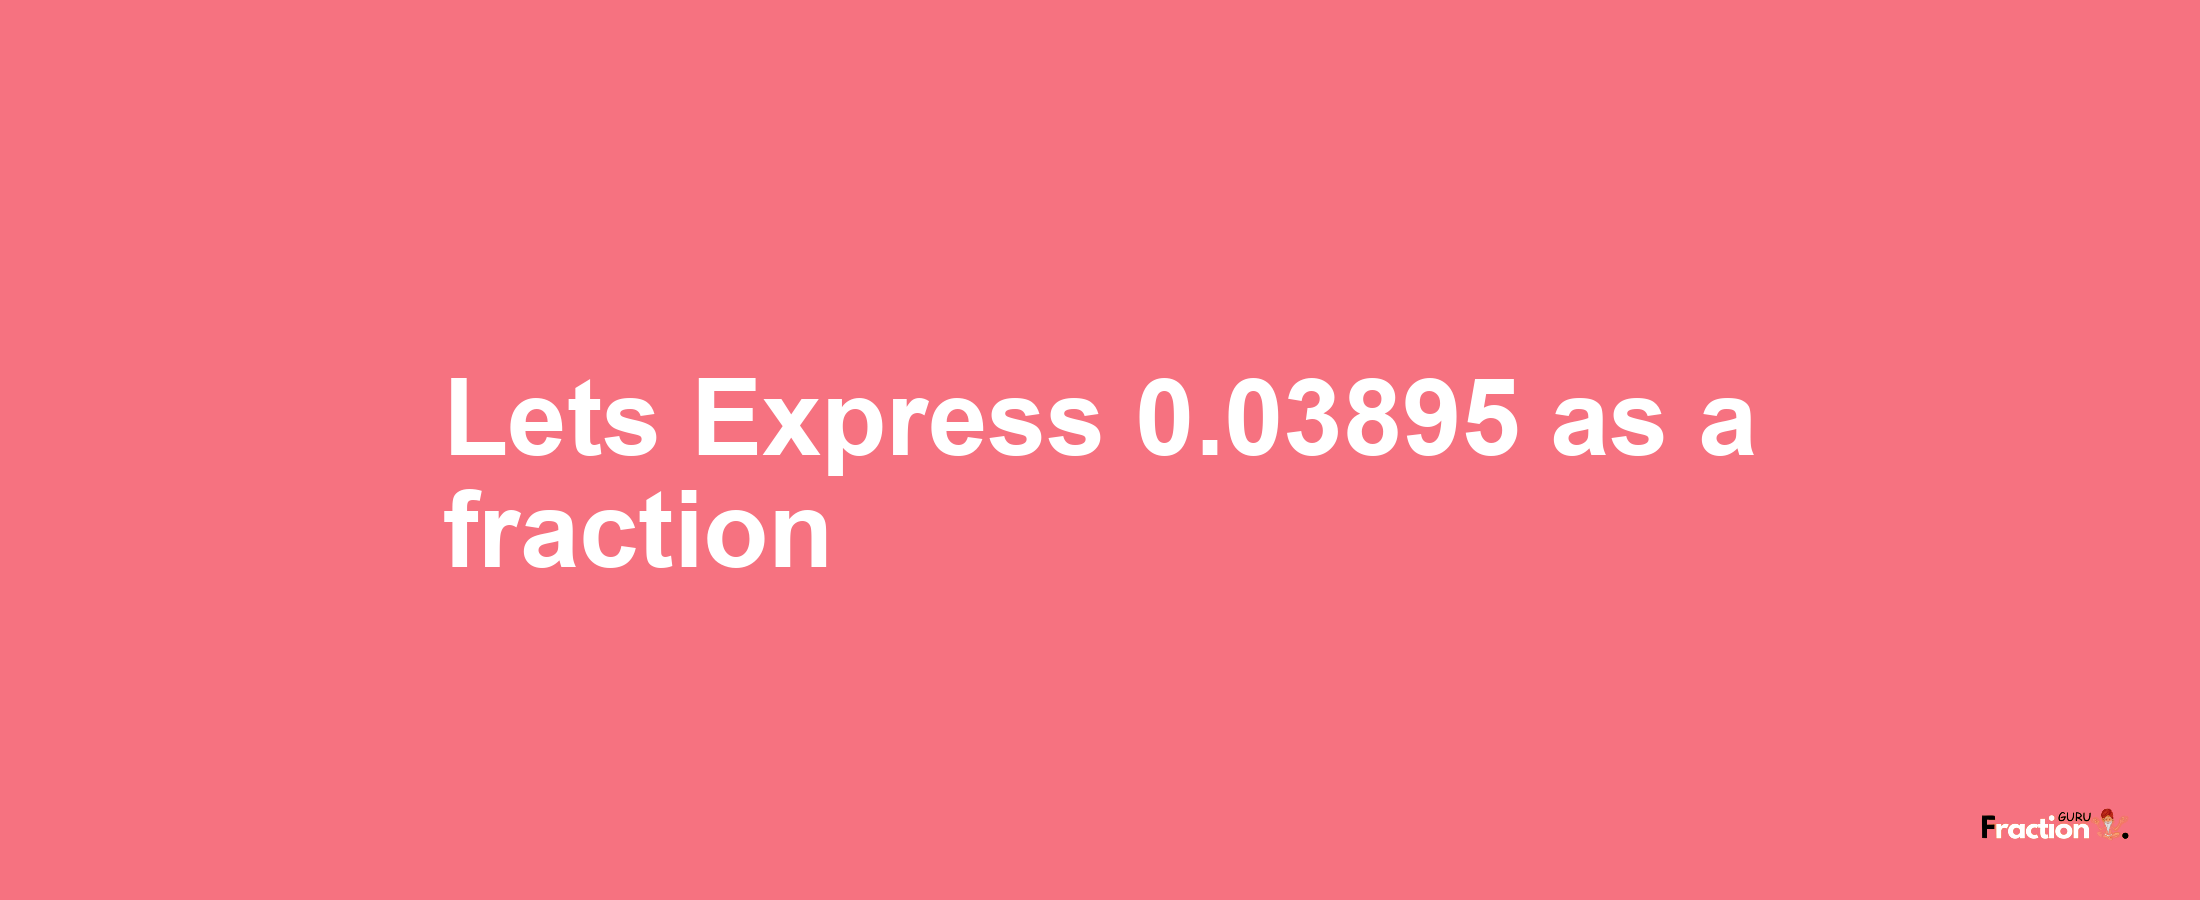 Lets Express 0.03895 as afraction